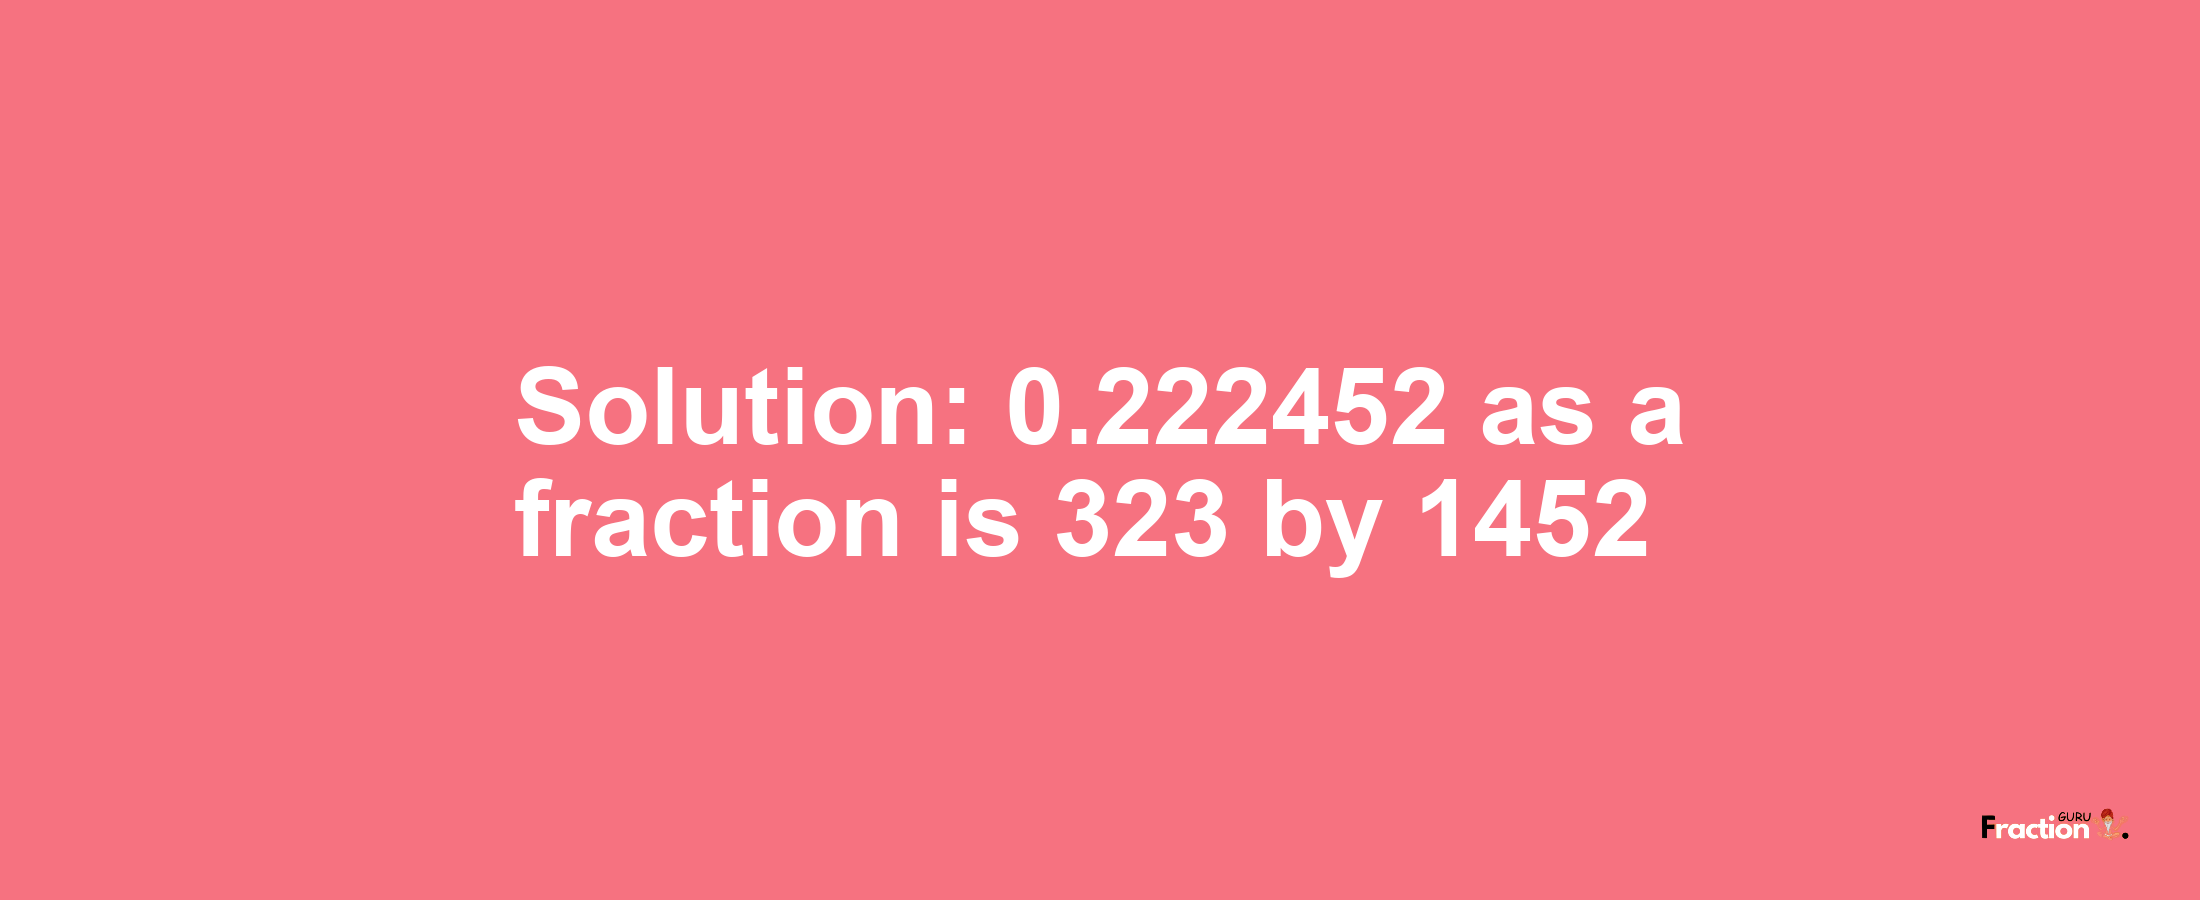 Solution:0.222452 as a fraction is 323/1452